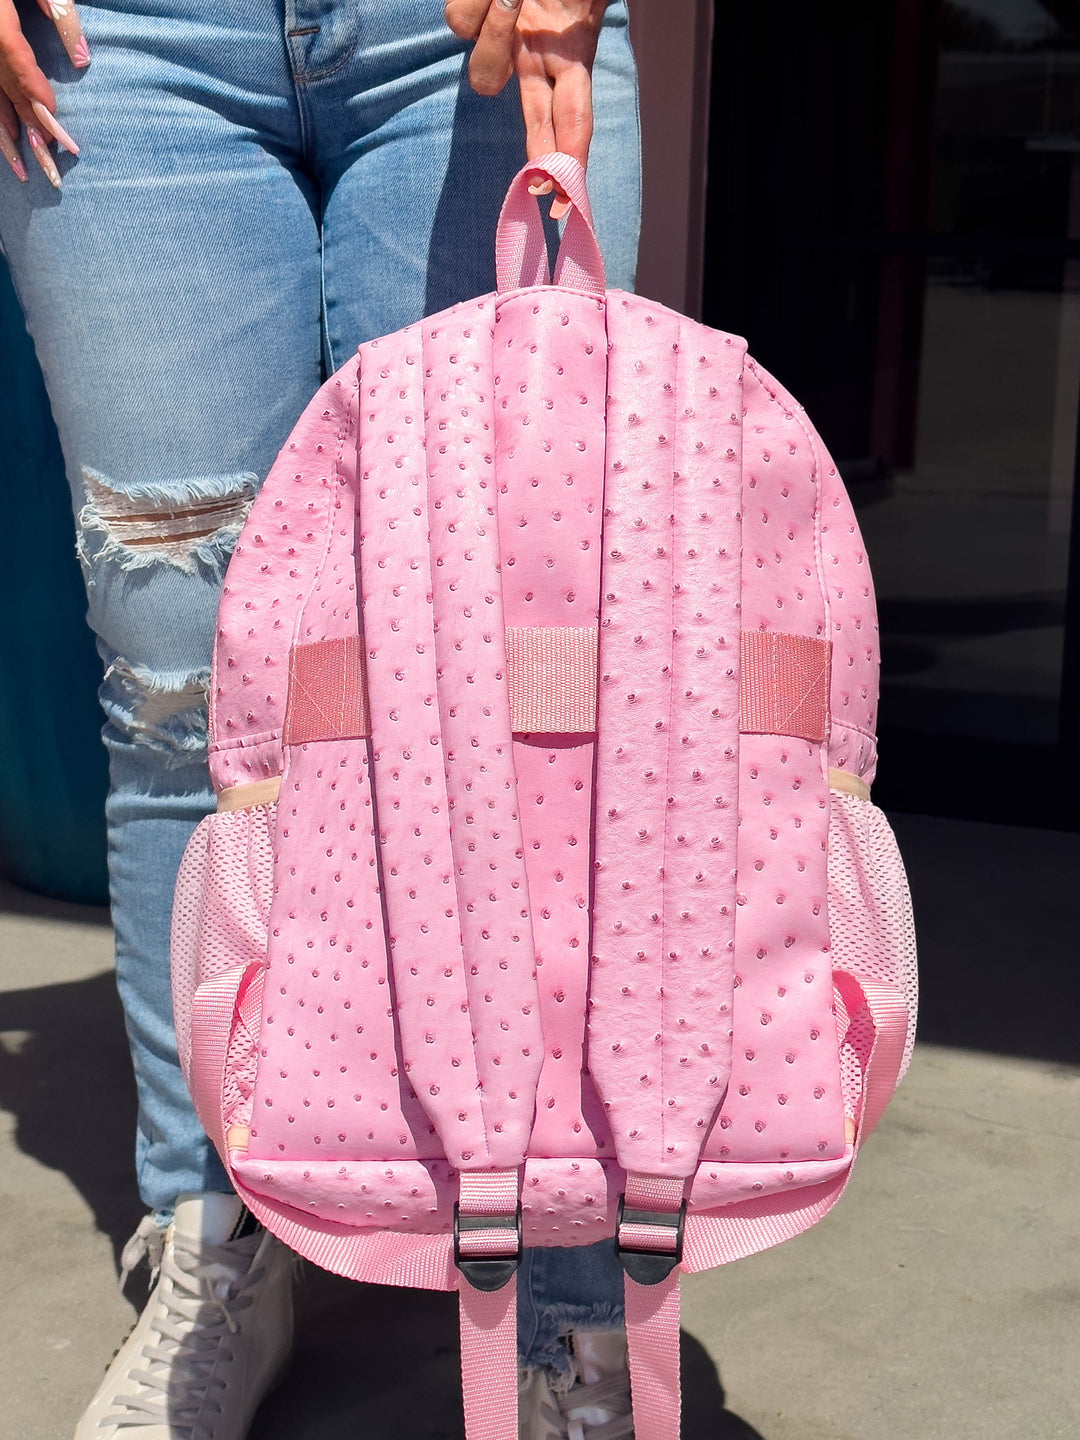 Makeup Junkie Bags - Pink Ostrich Backpack [Ready to ship] Glamfox Exclusive